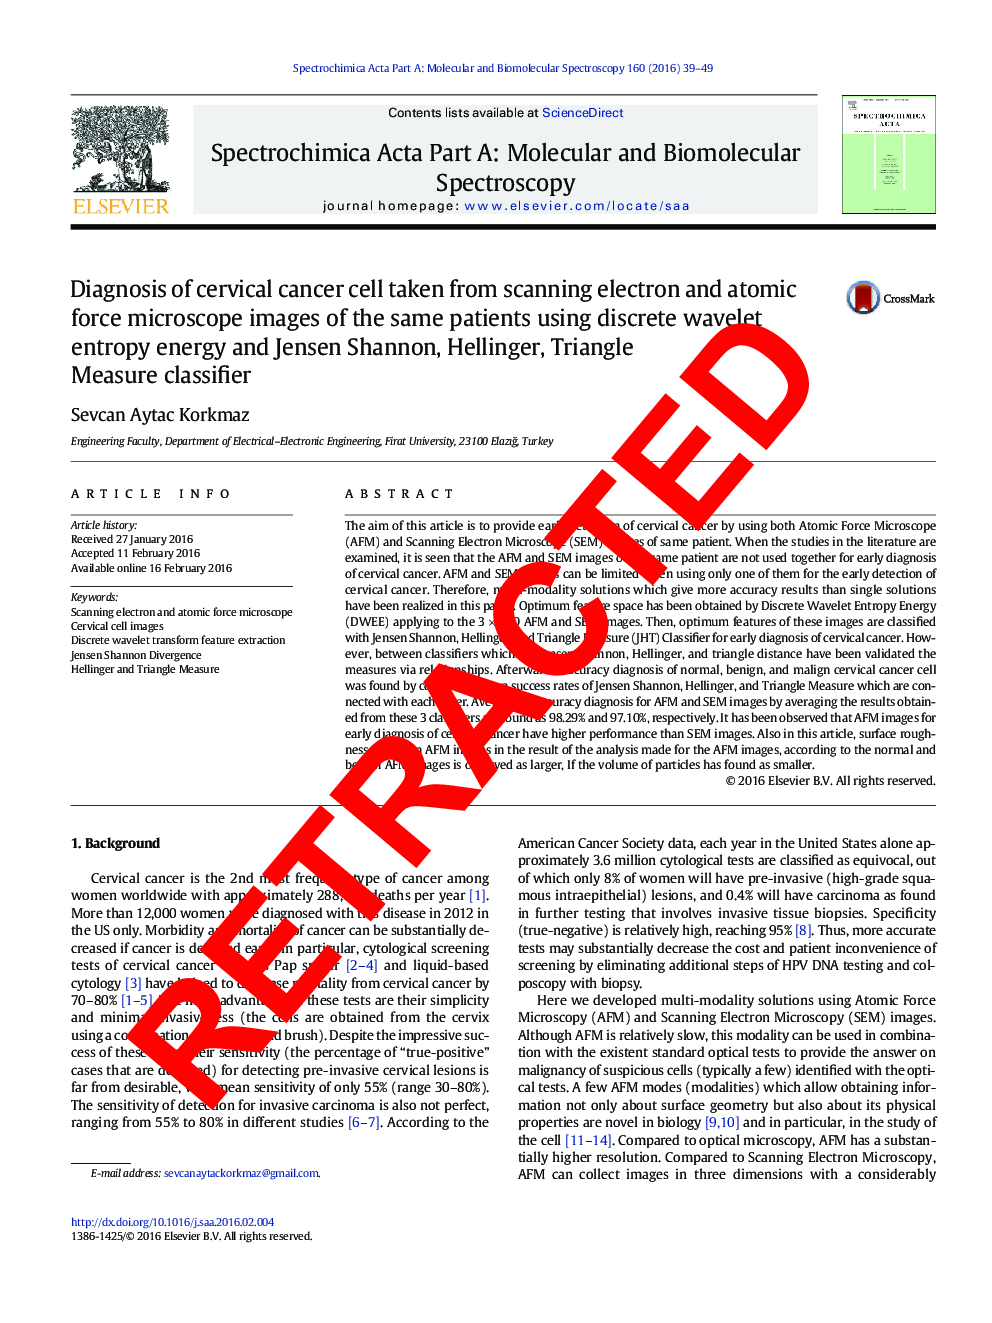 RETRACTED: Diagnosis of cervical cancer cell taken from scanning electron and atomic force microscope images of the same patients using discrete wavelet entropy energy and Jensen Shannon, Hellinger, Triangle Measure classifier